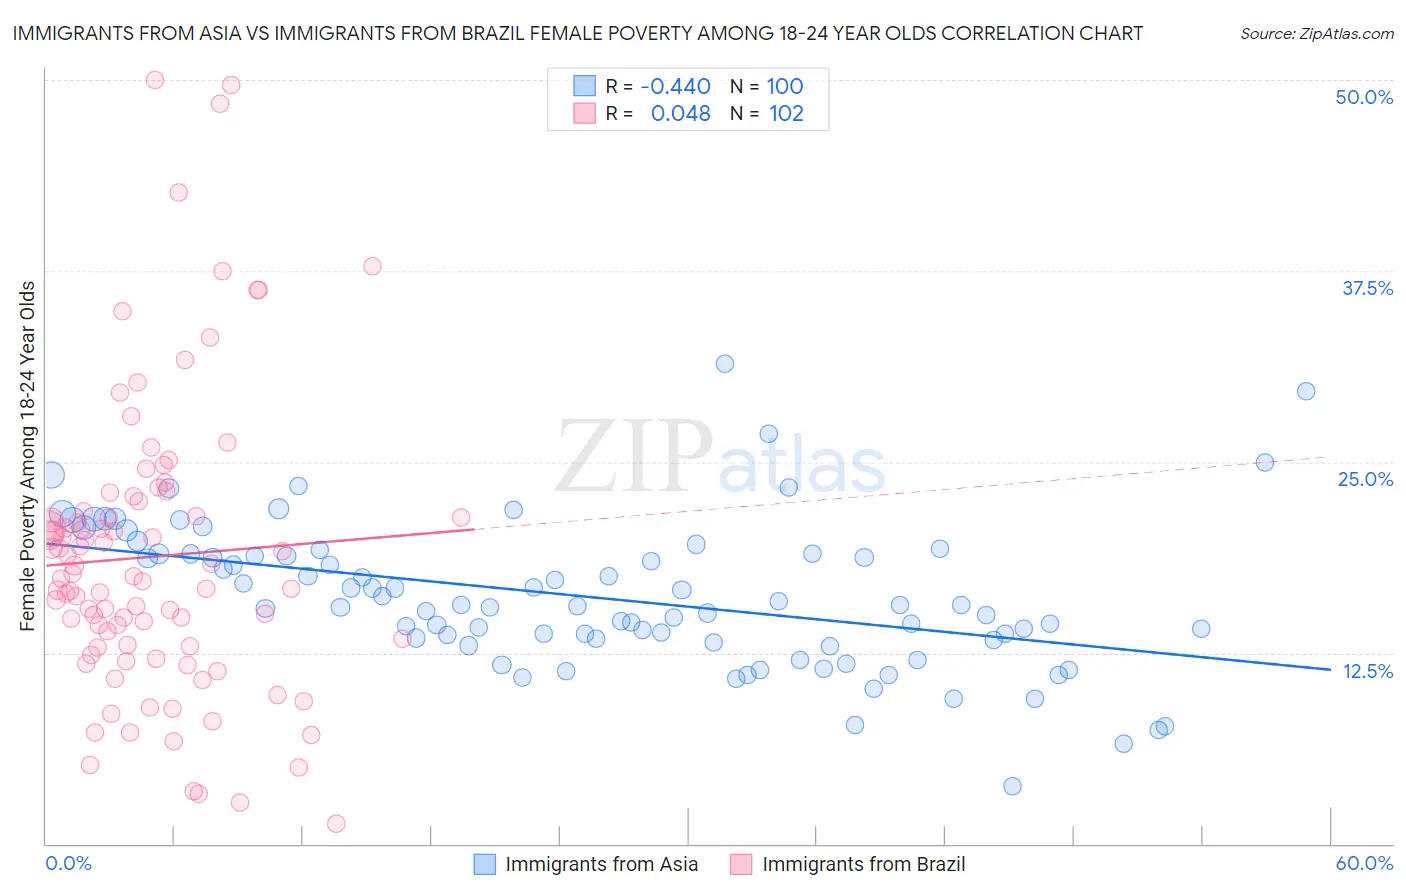 Immigrants from Asia vs Immigrants from Brazil Female Poverty Among 18-24 Year Olds